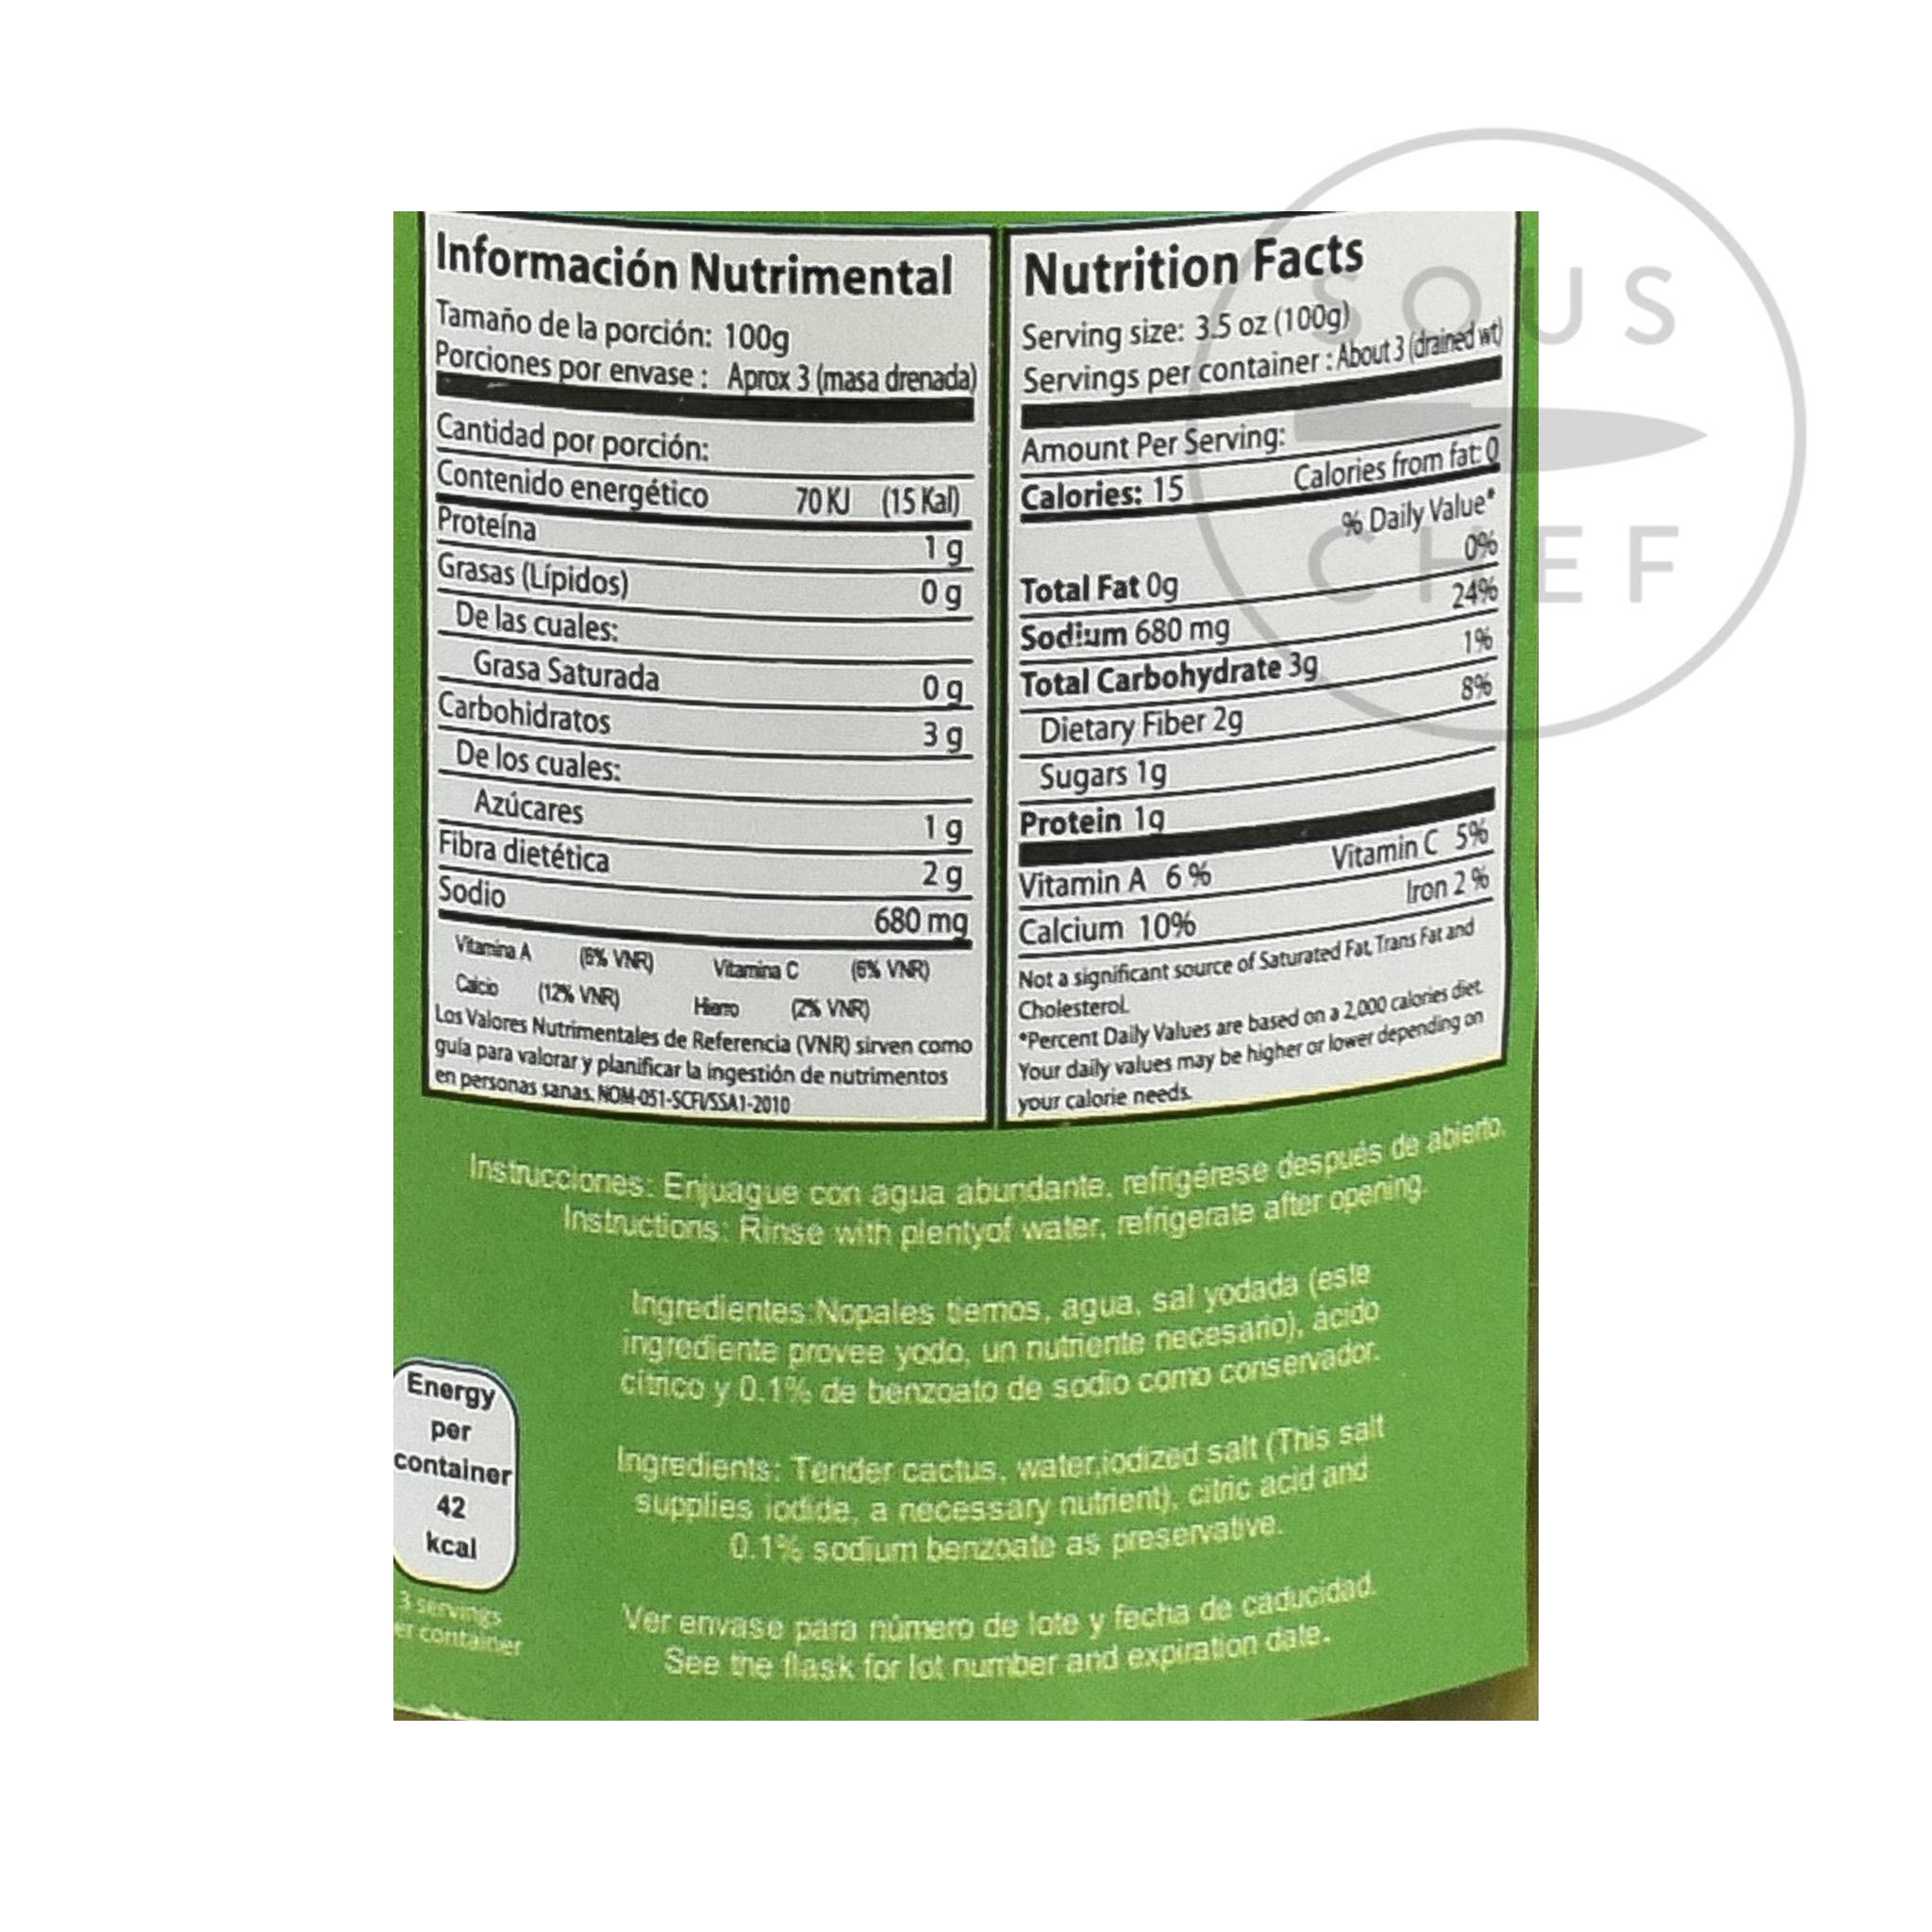 Azteca Cambray Whole Cactus Leaves 460g Ingredients Nutritional Information Mexican Food and Cooking